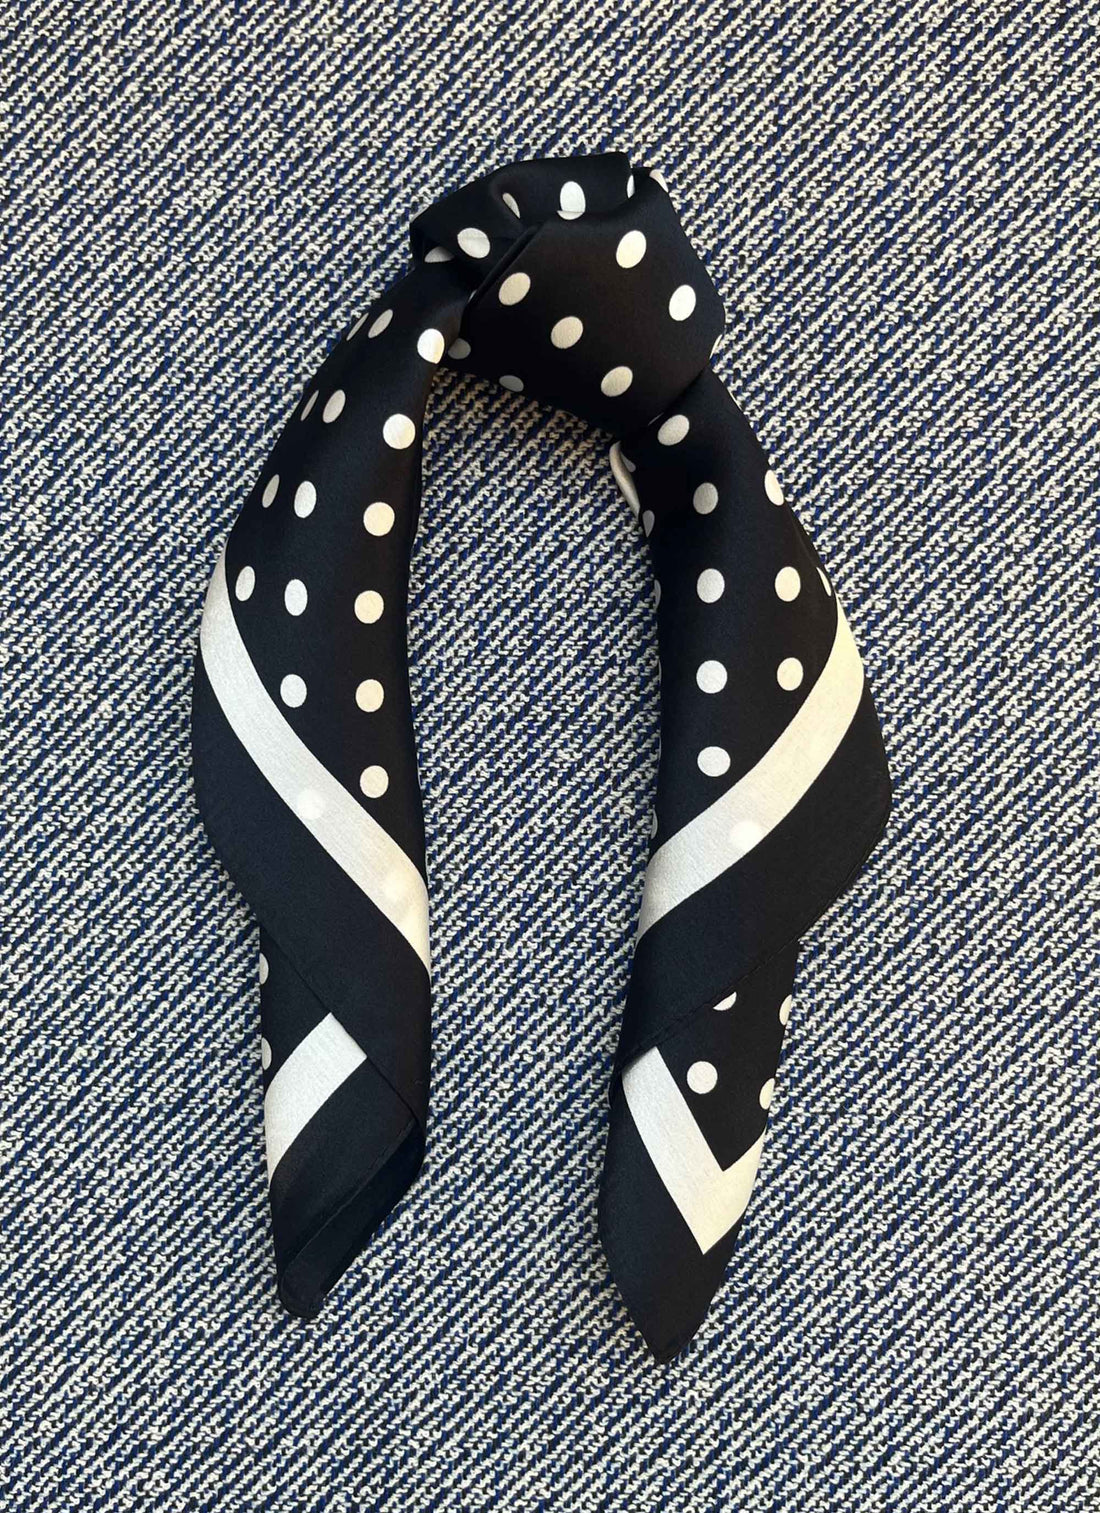 Silk scarf black/off white dots and stripe